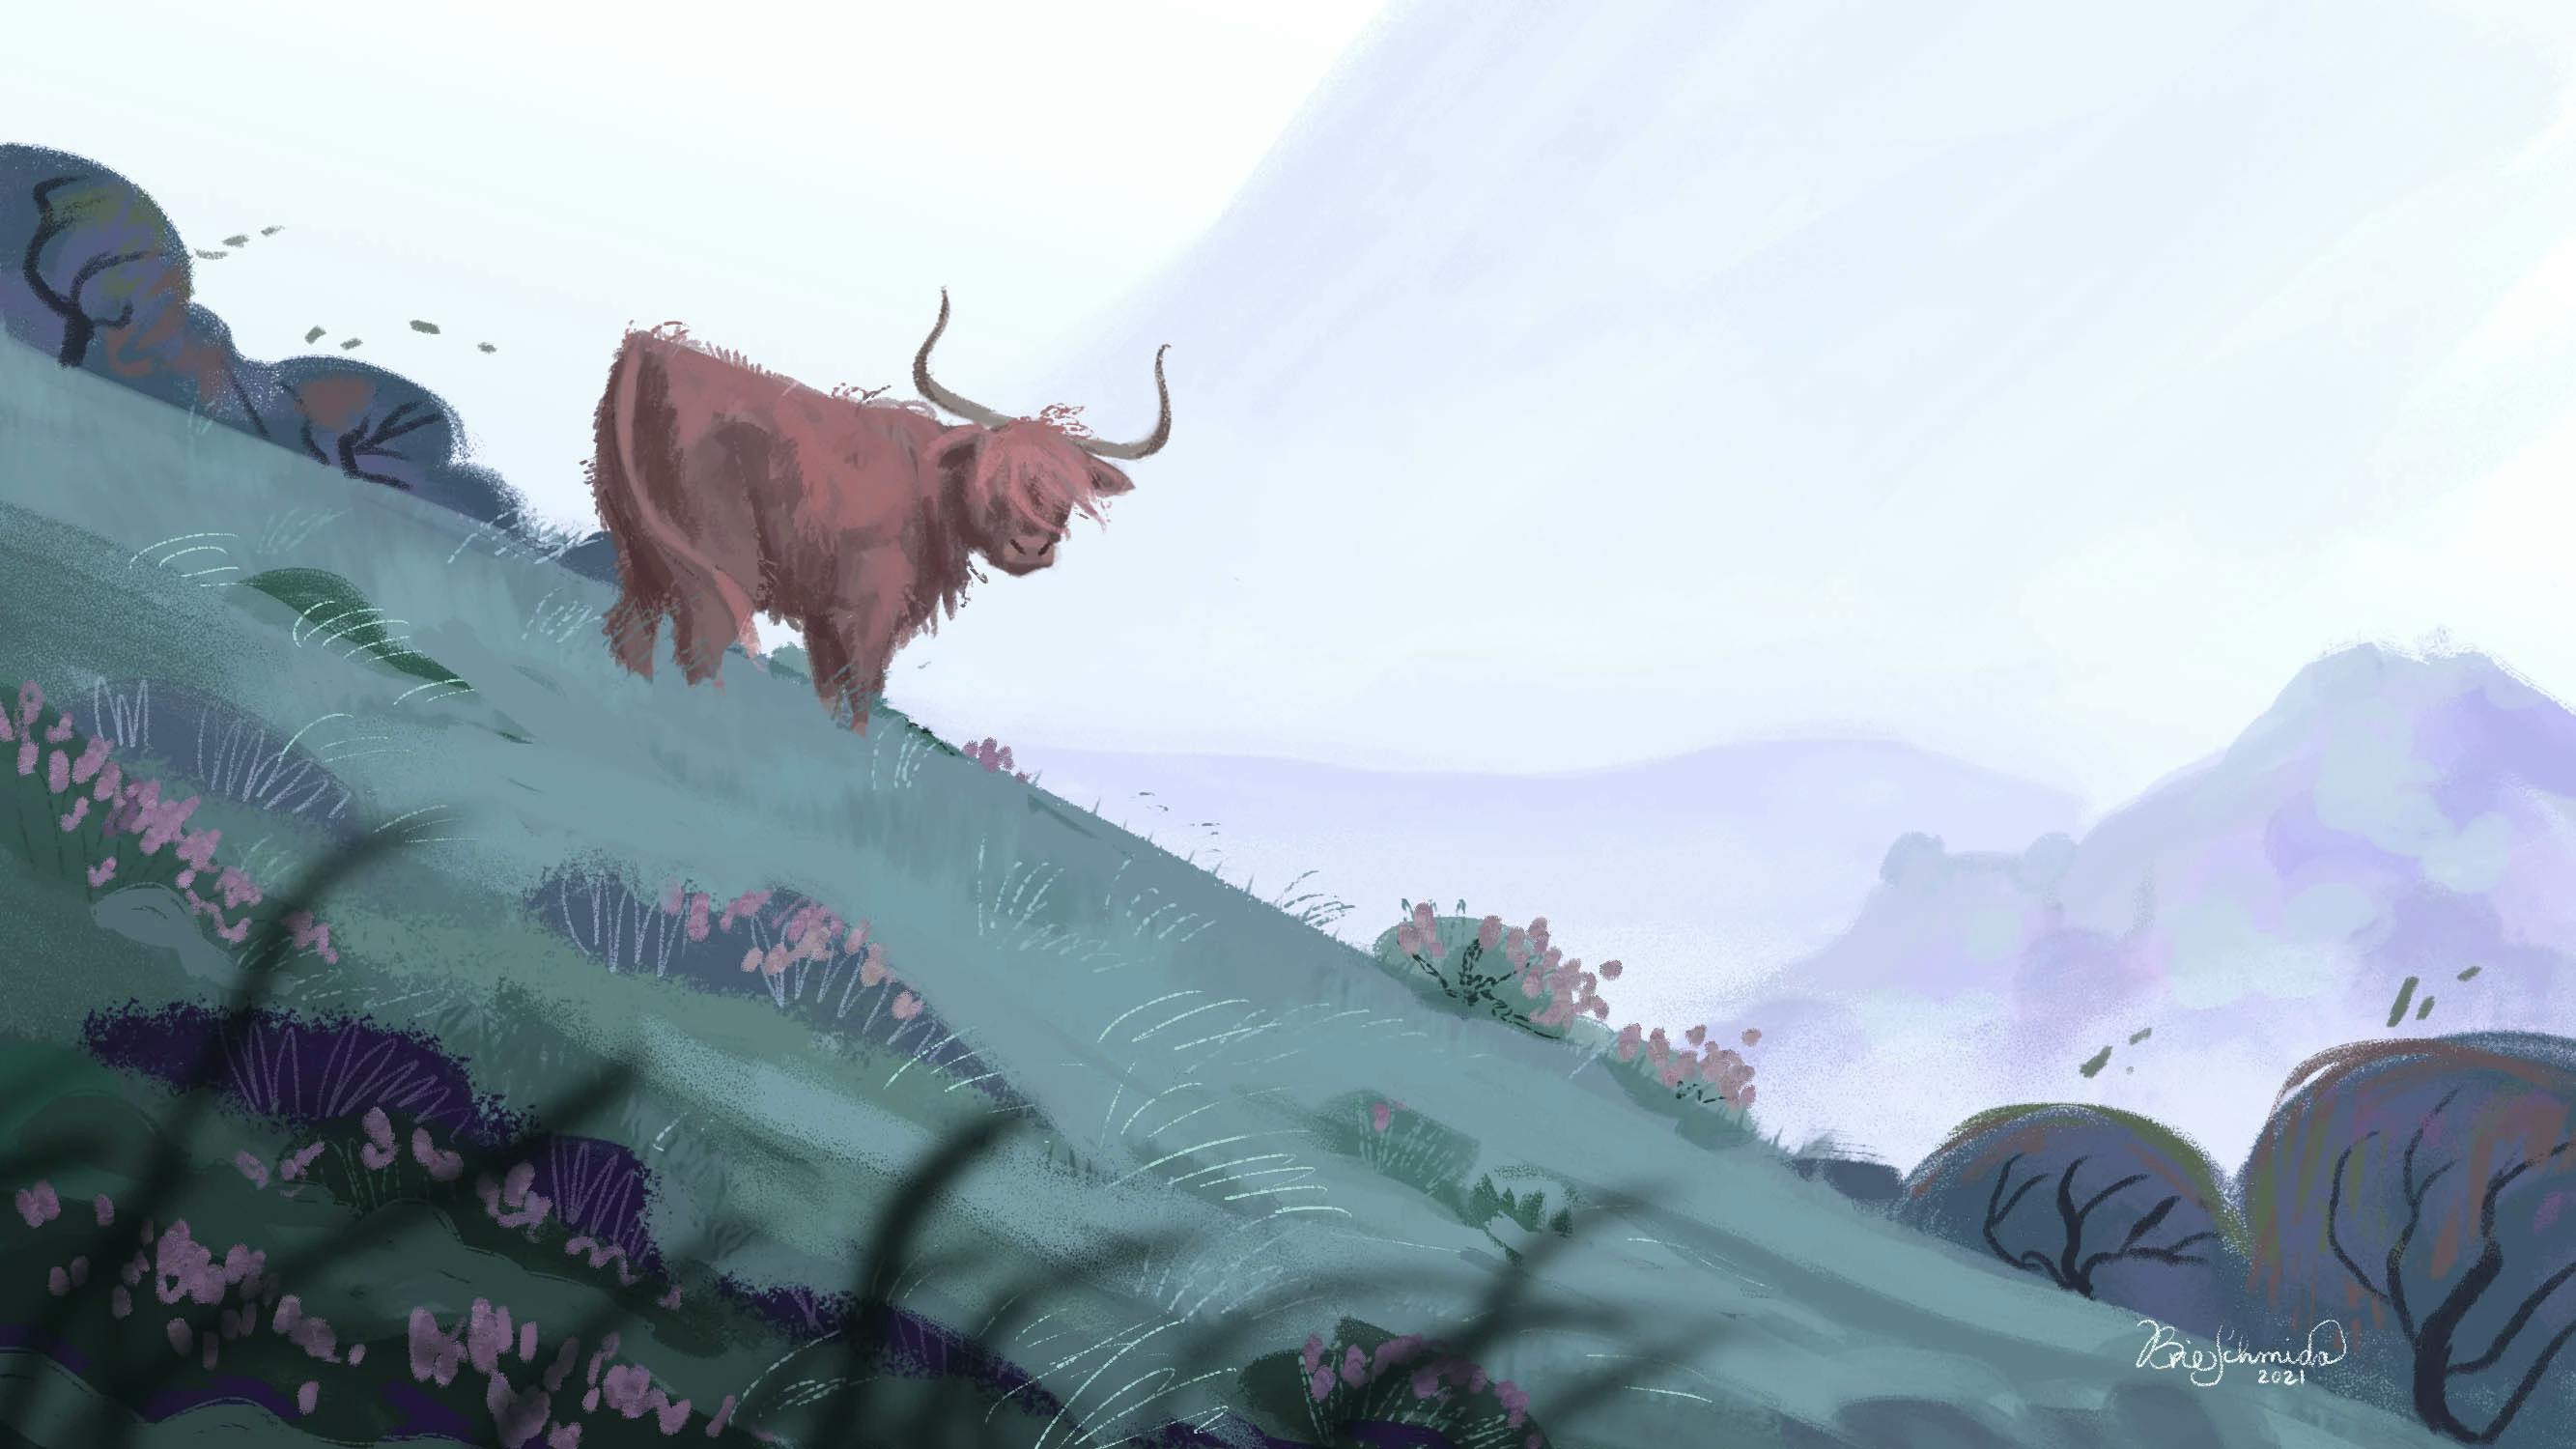 An illustration of a hairy cow on a hillside